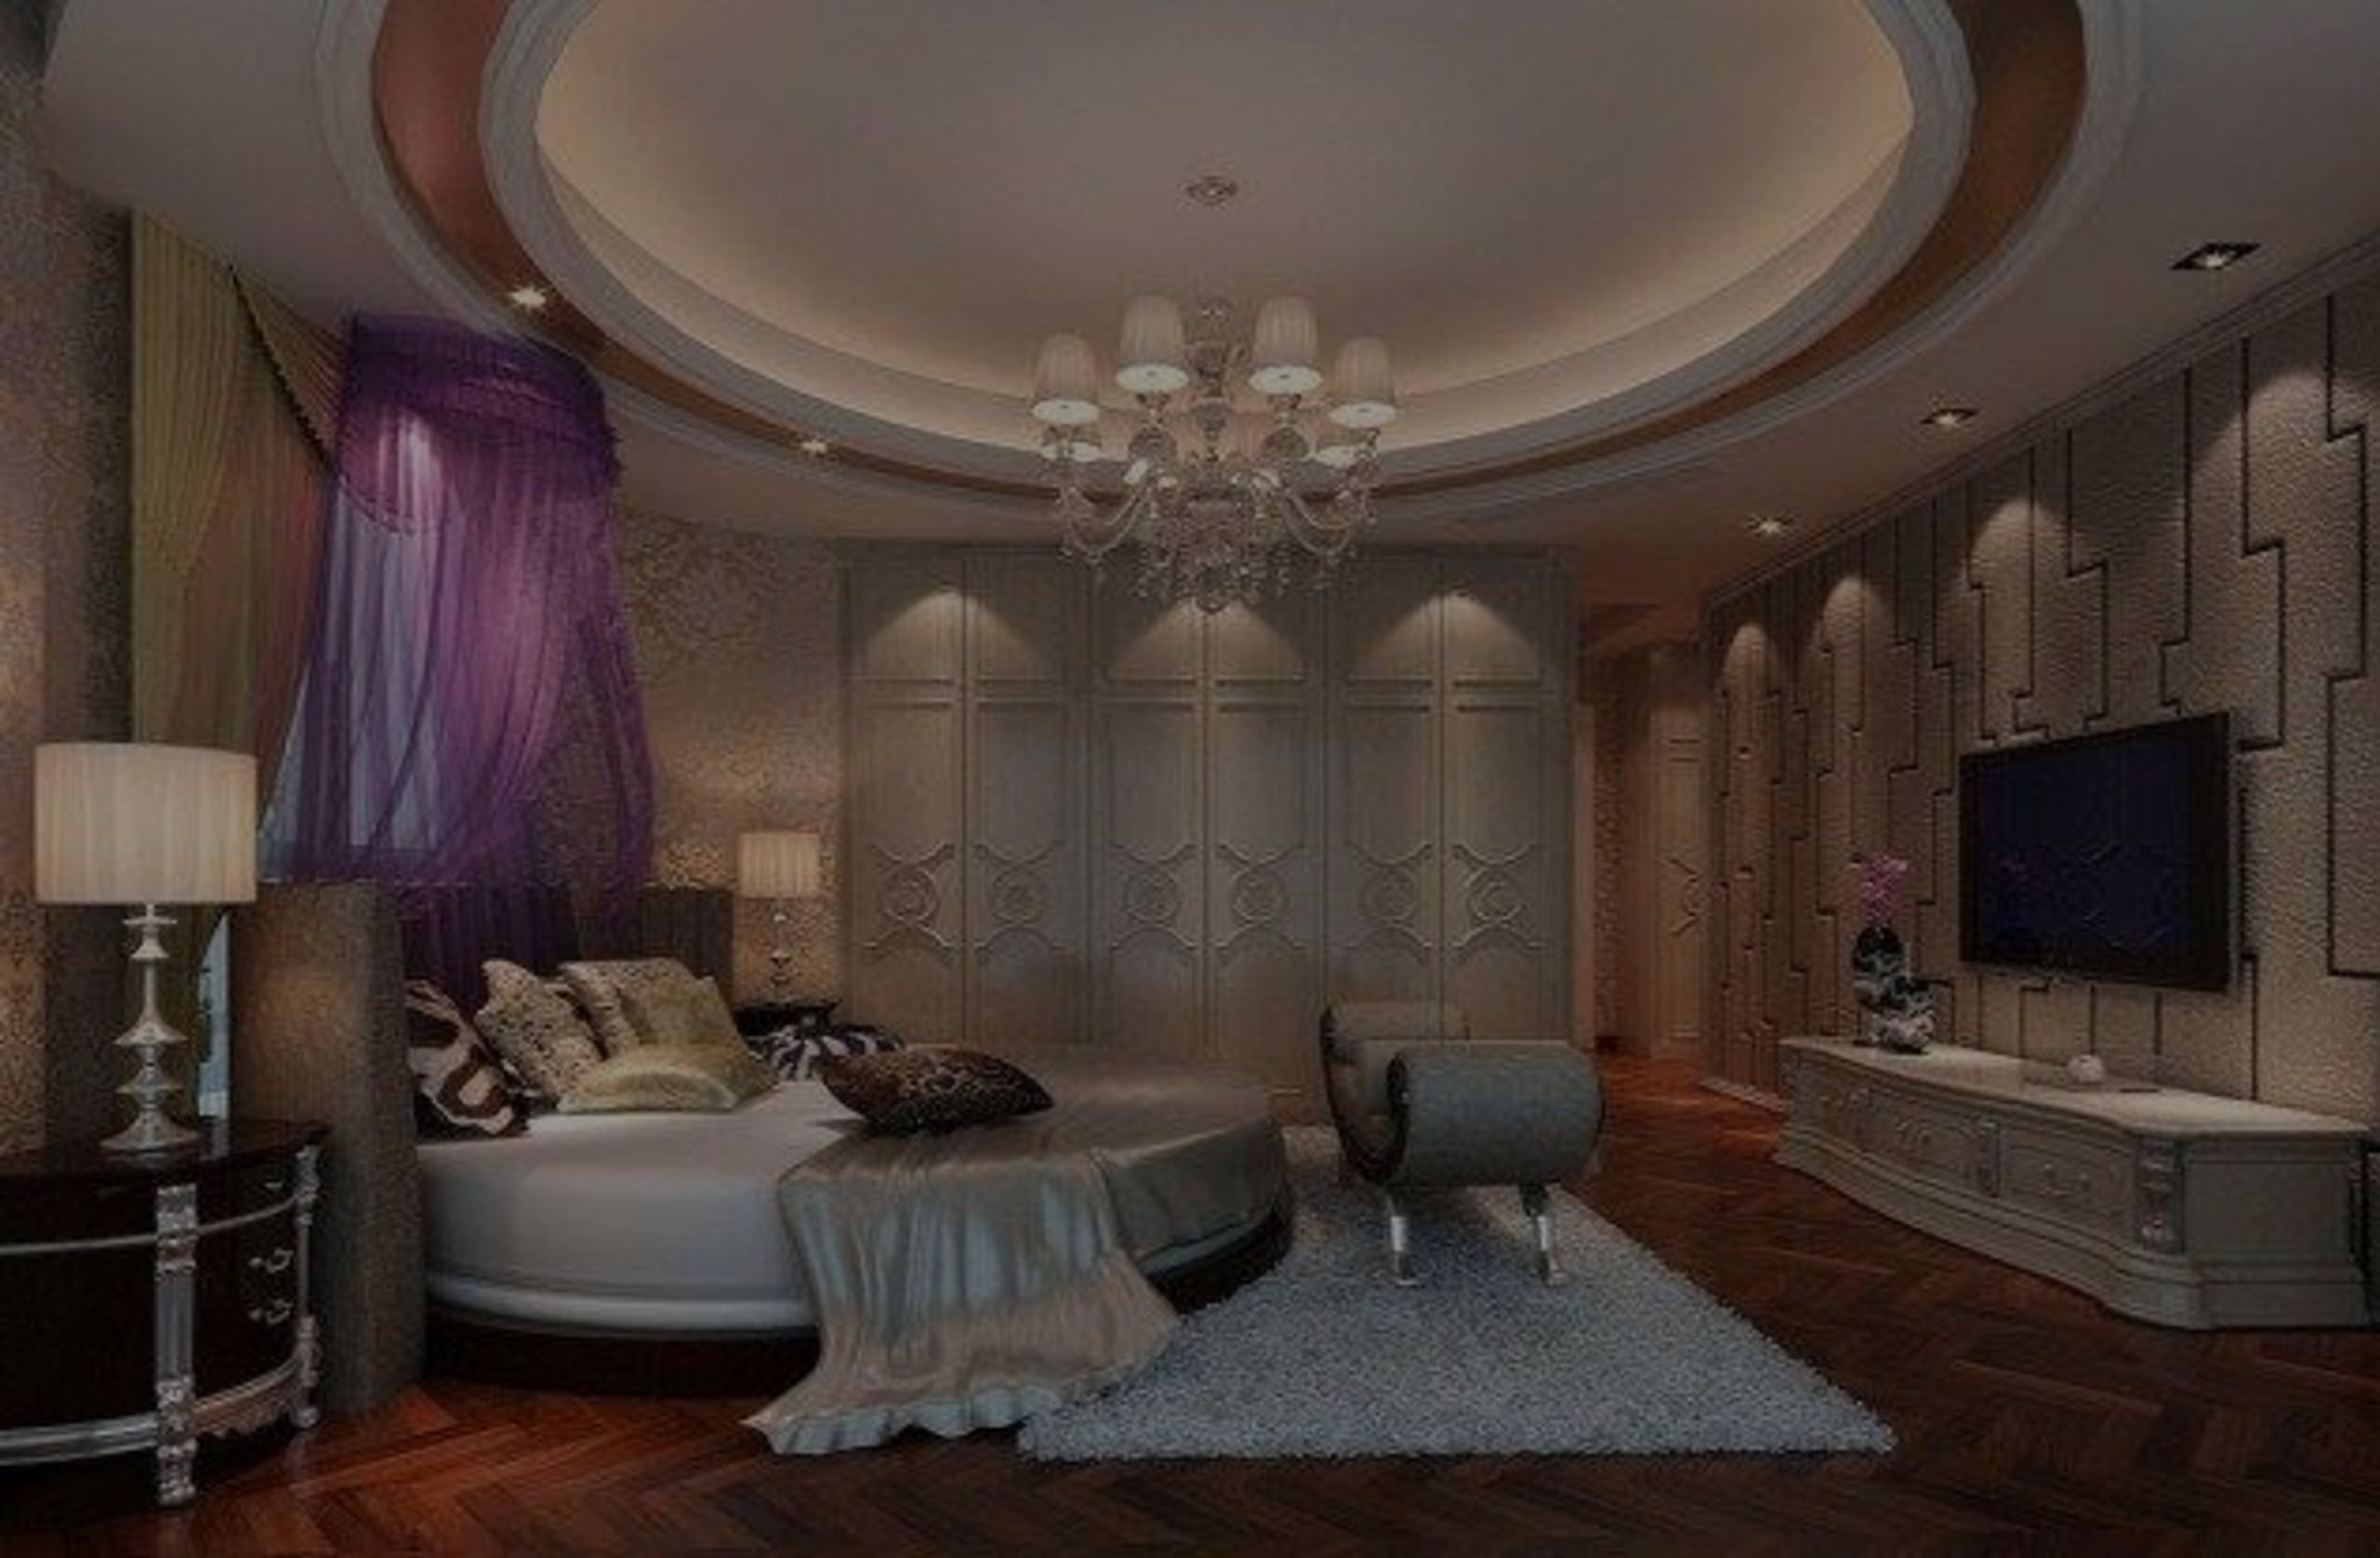 Exquisite Bedroom Designs That Will Leave You Speechless